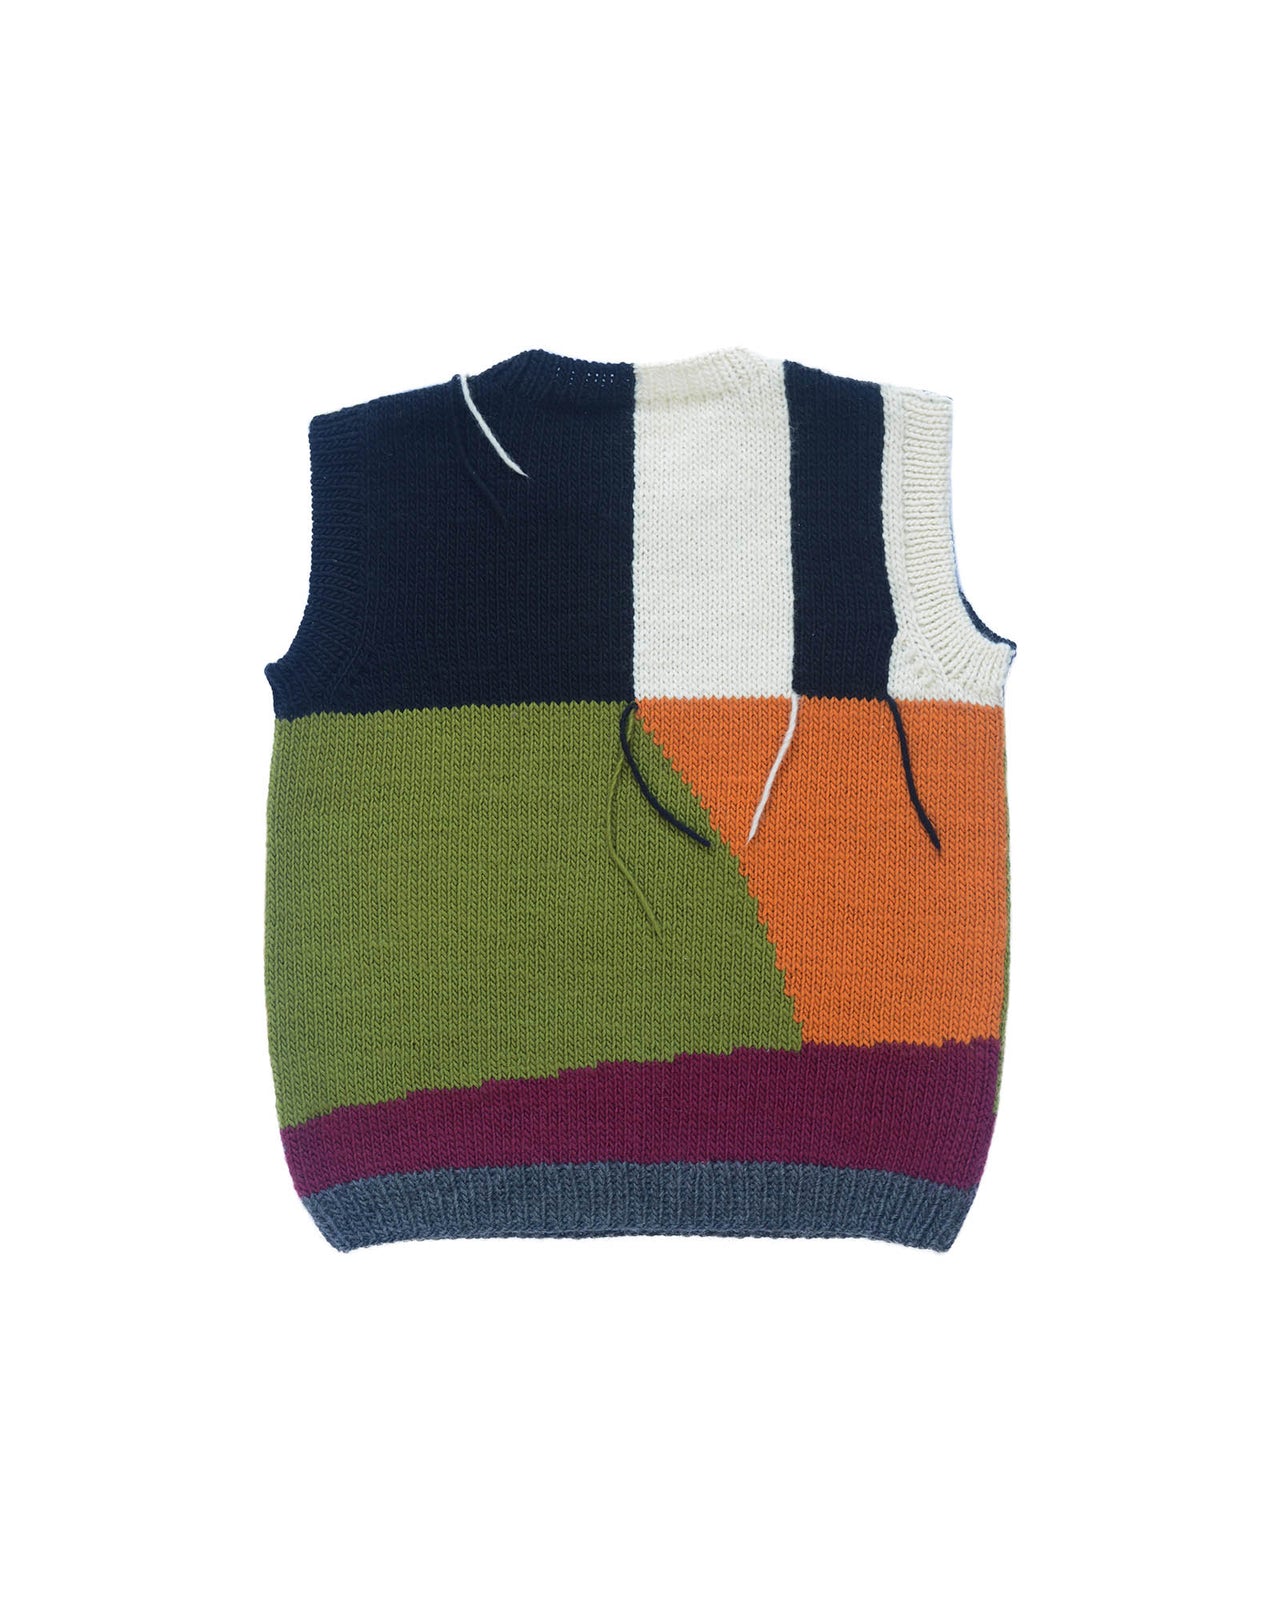 back of wool vest layed flat on white background. Vest with green, orange, black, white and red colour block design and hanging threads. 